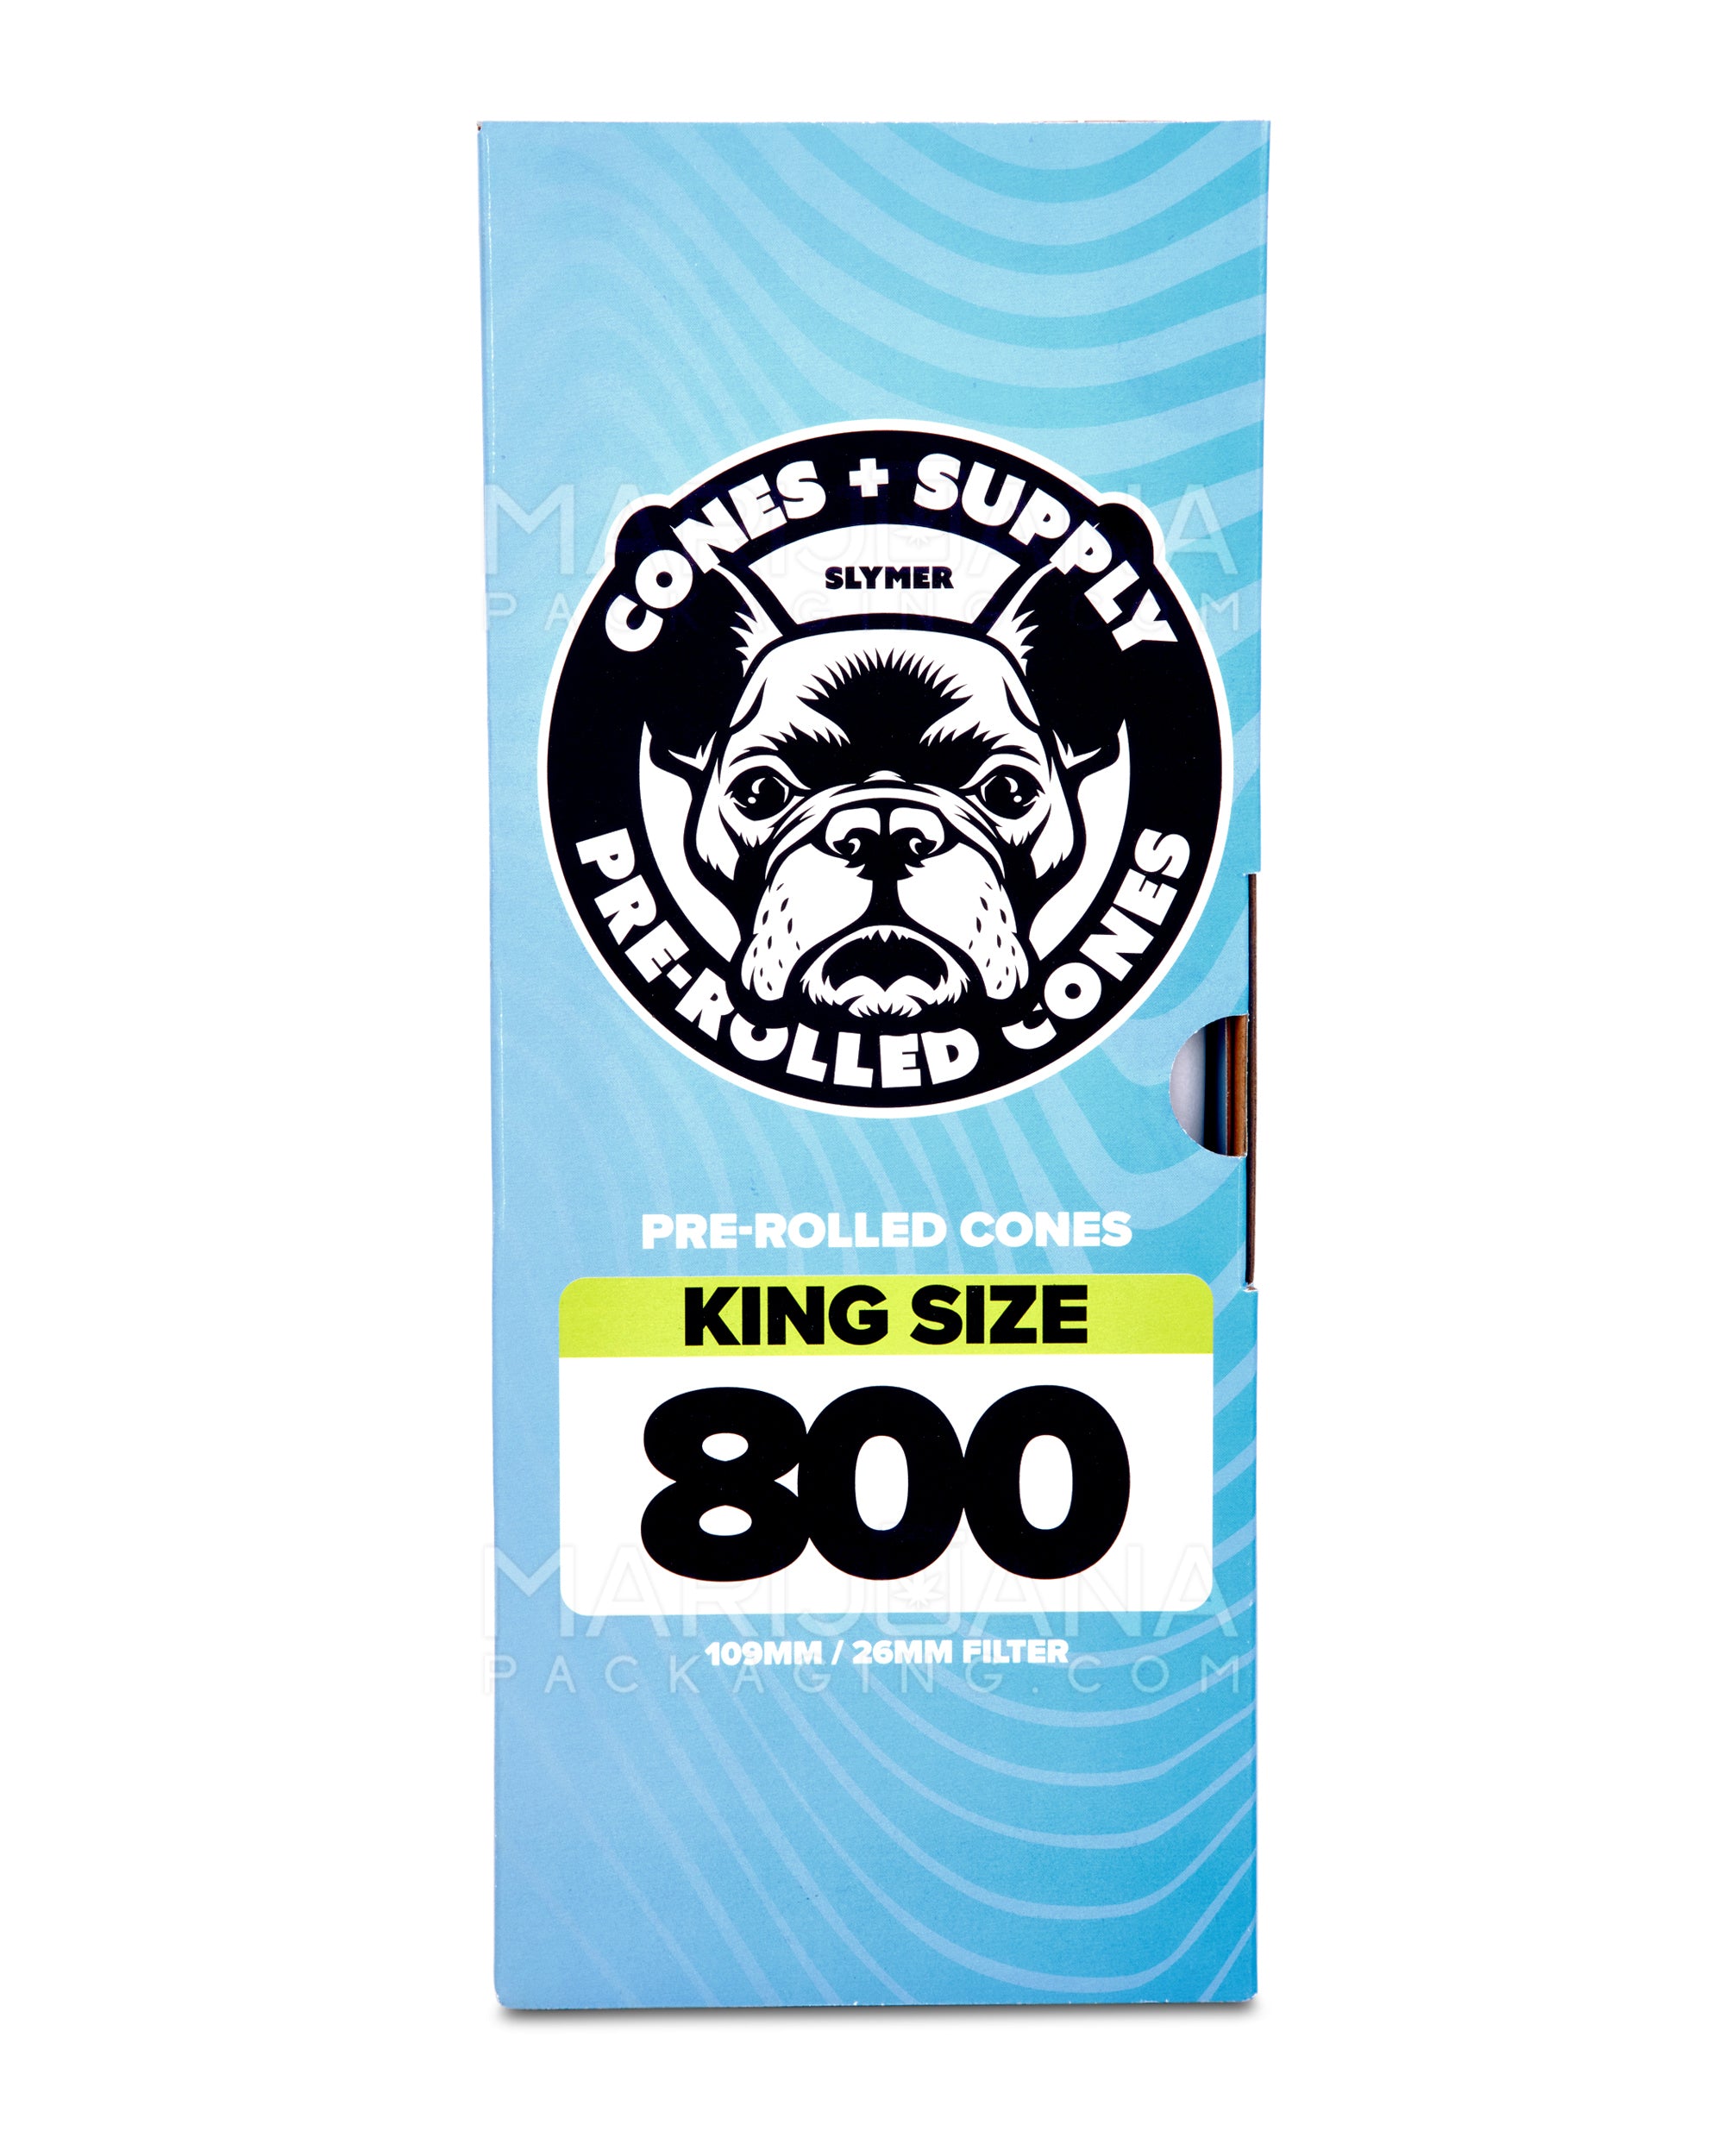 CONES + SUPPLY | King Size Pre-Rolled Cones | 109mm - Classic White Paper - 800 Count - 5